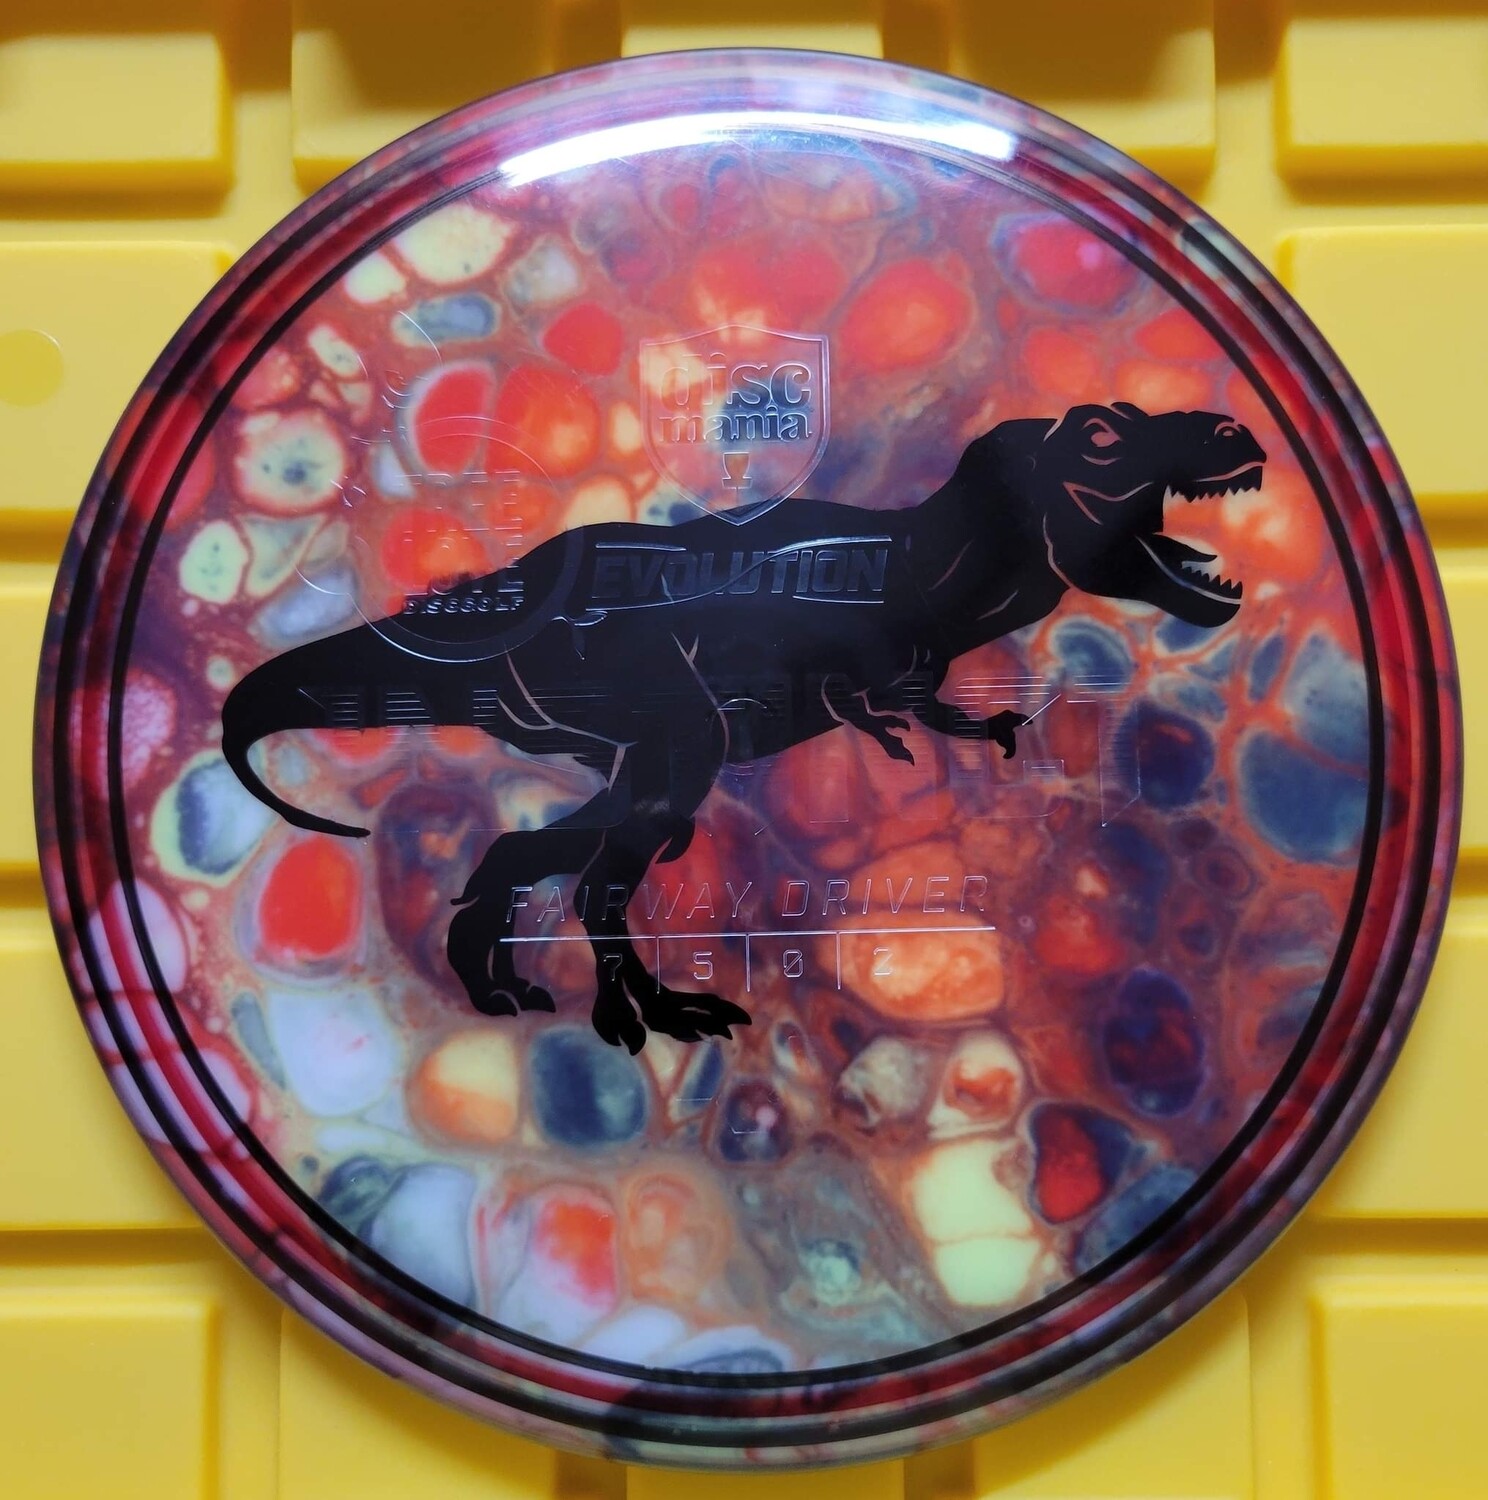 Discmania Neo Instinct 176g Brought to you by Ninja Disc Golf. Free Shipping!